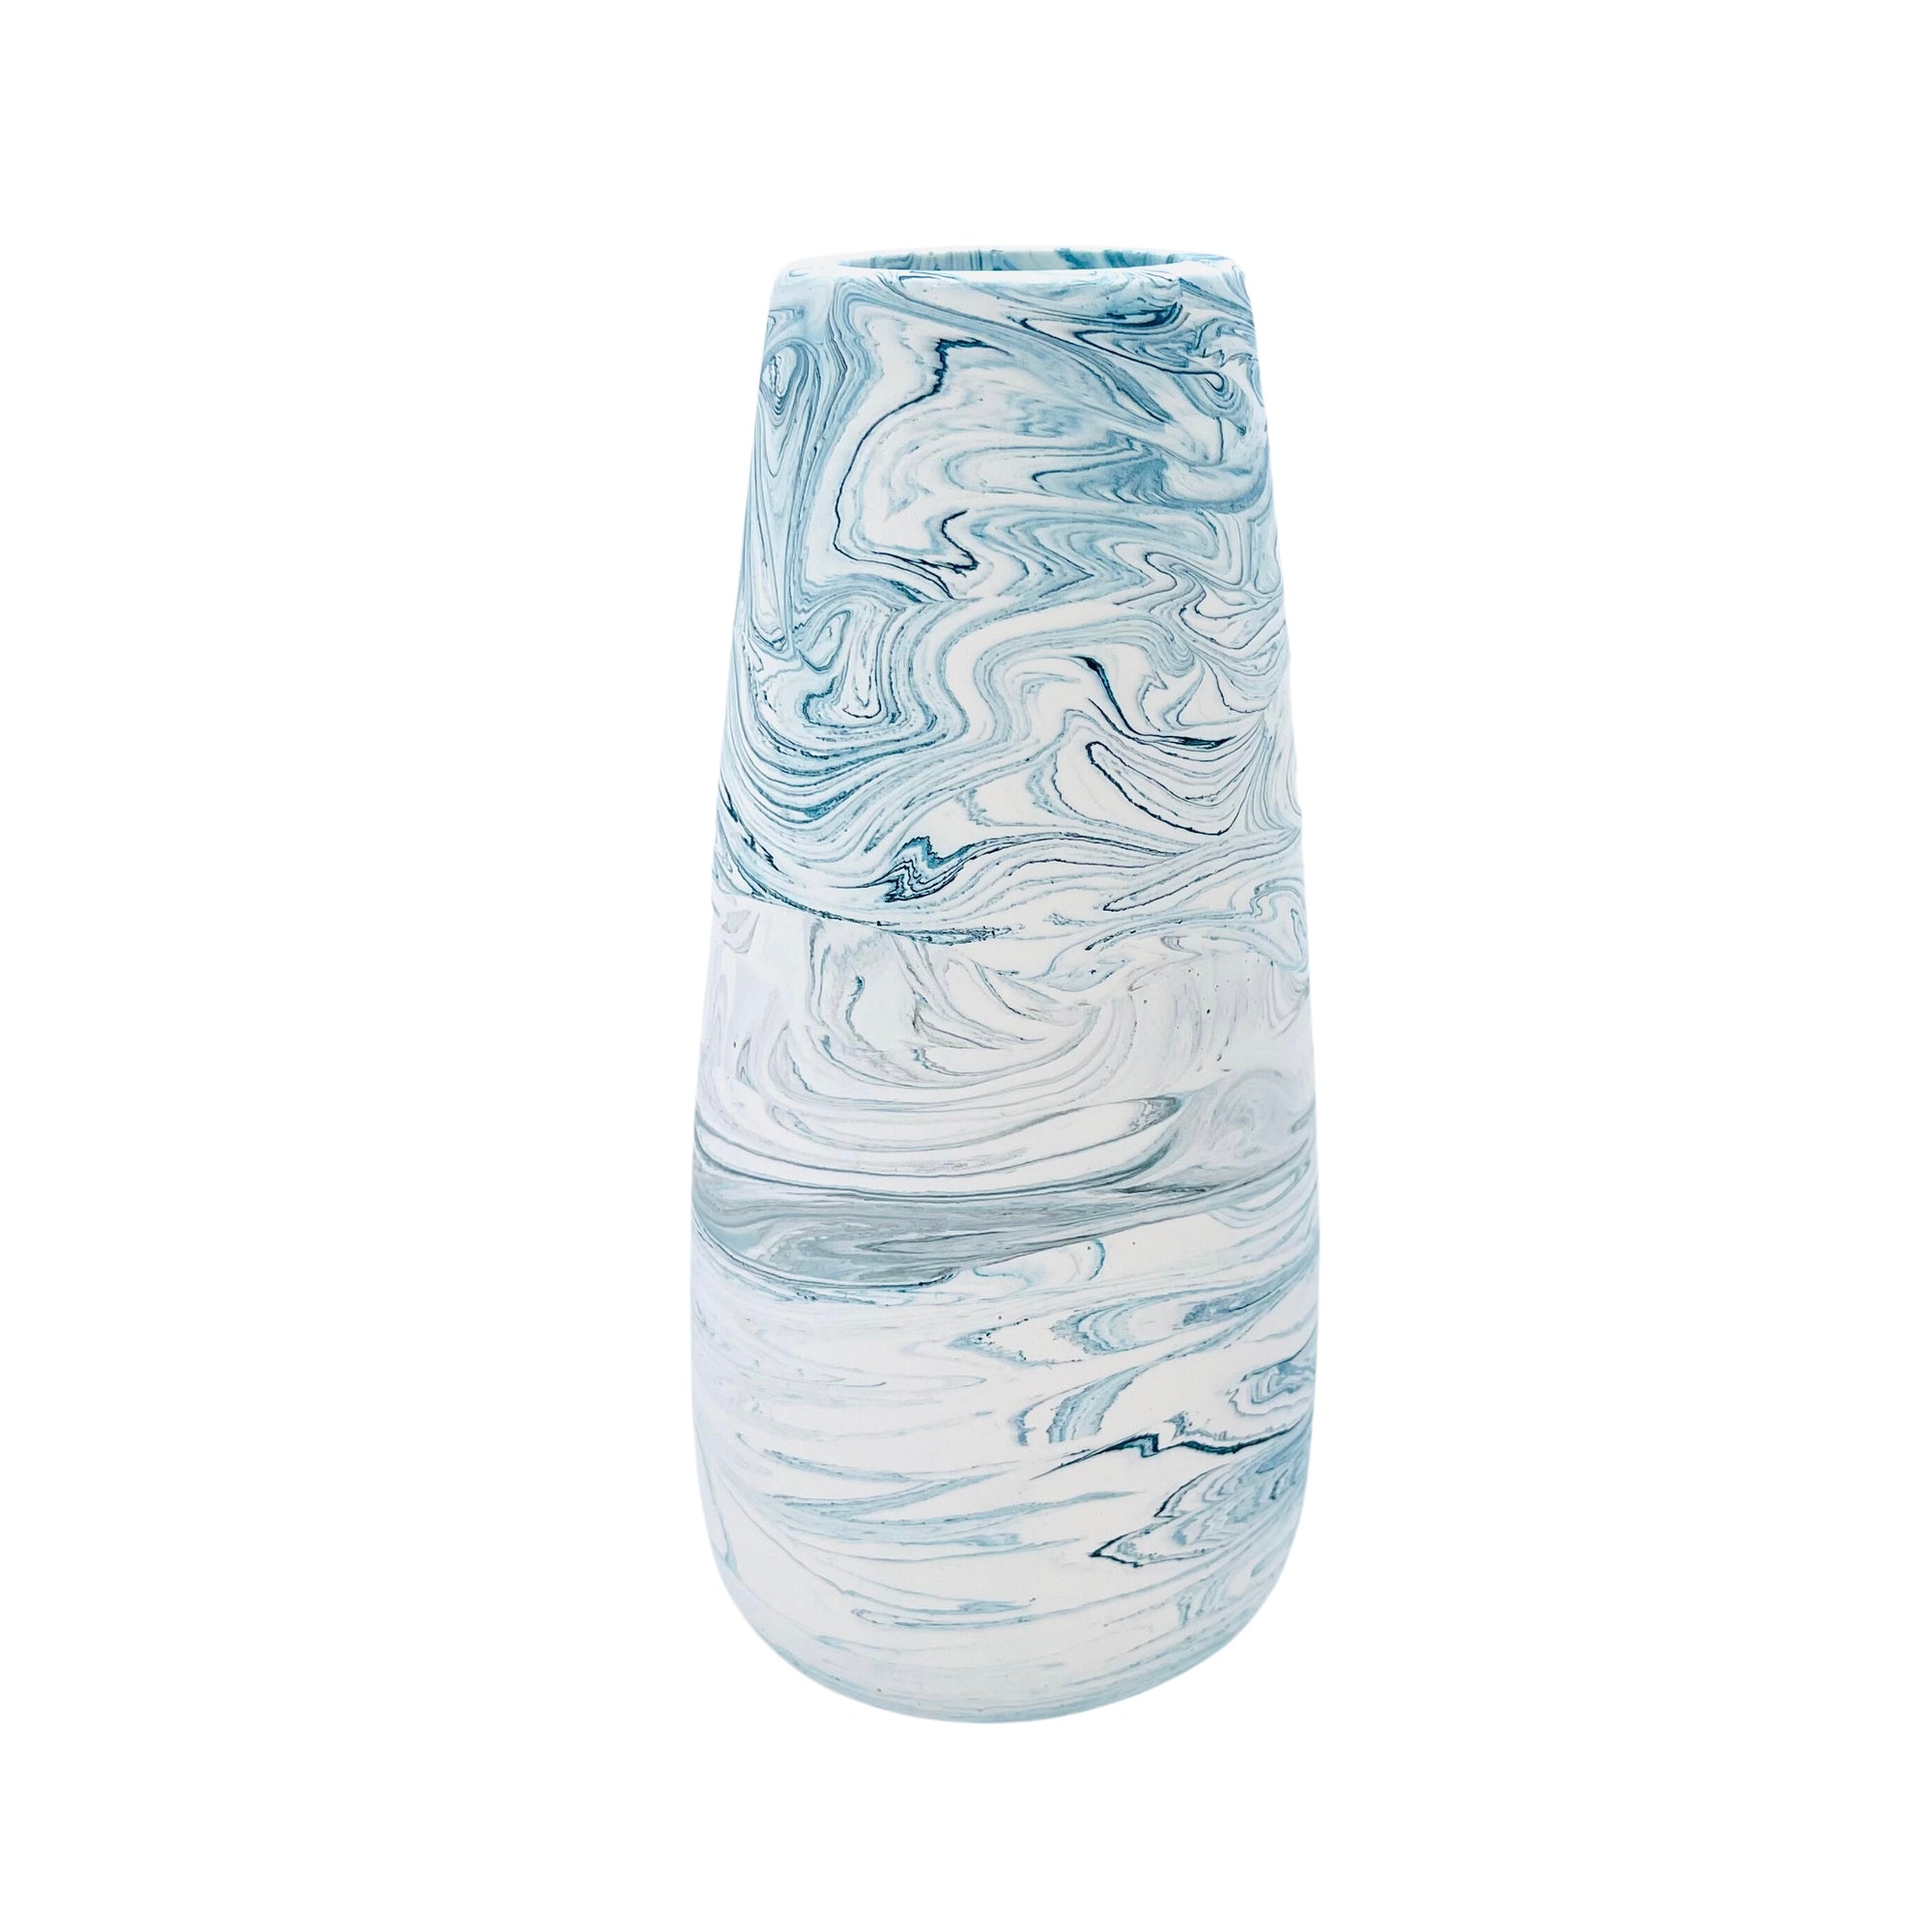 A heavy base vase made from  jesmonite standing 19.5cm in height marbled with blue lagoon pigment.